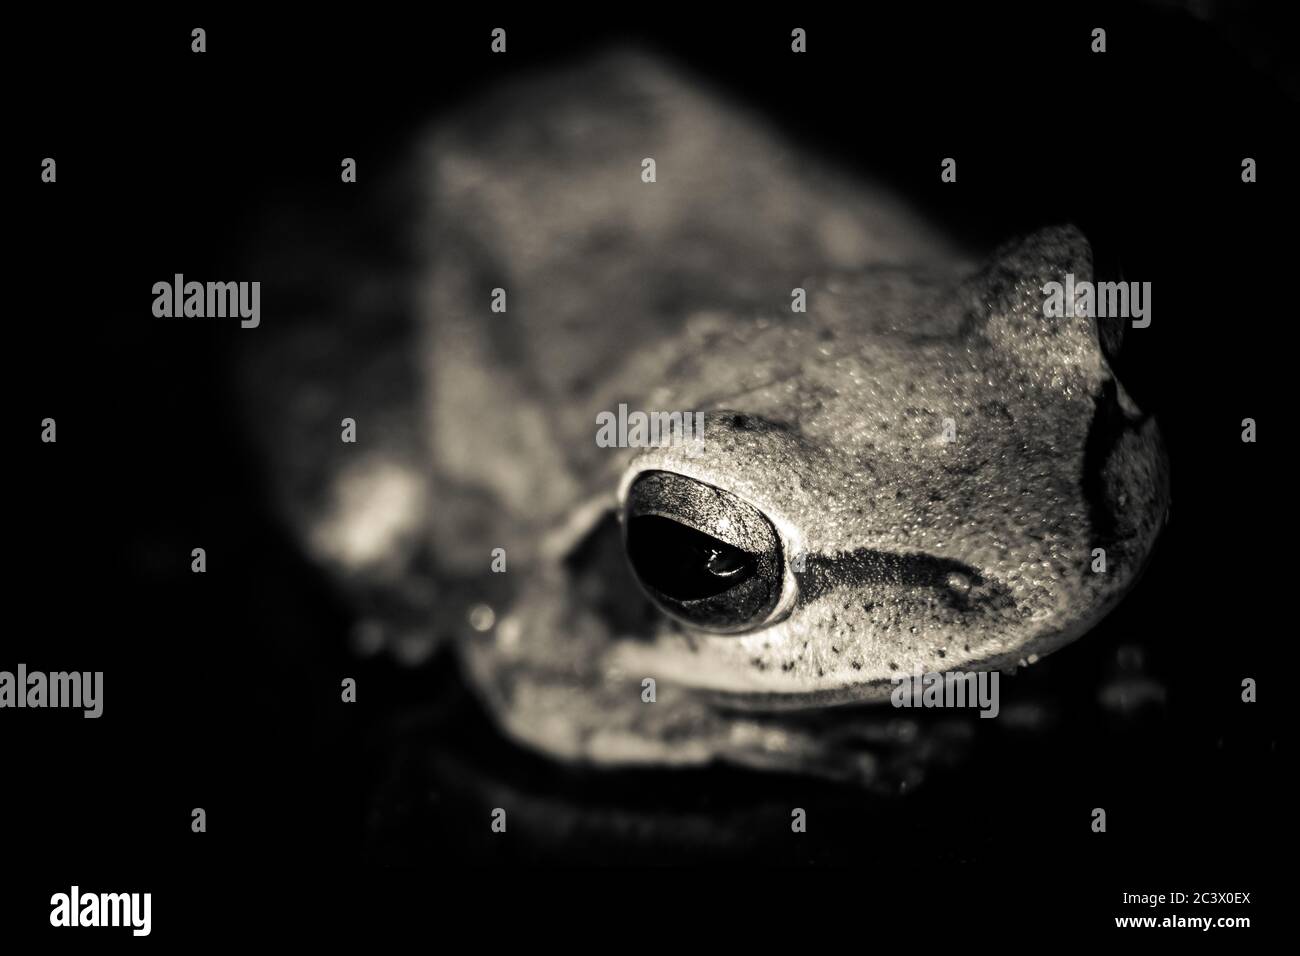 Very close photo of the leucomystax Polypedate frog with eye focused. Image of Common tree frog, four-lined tree frog, silver tree frog on white backg Stock Photo